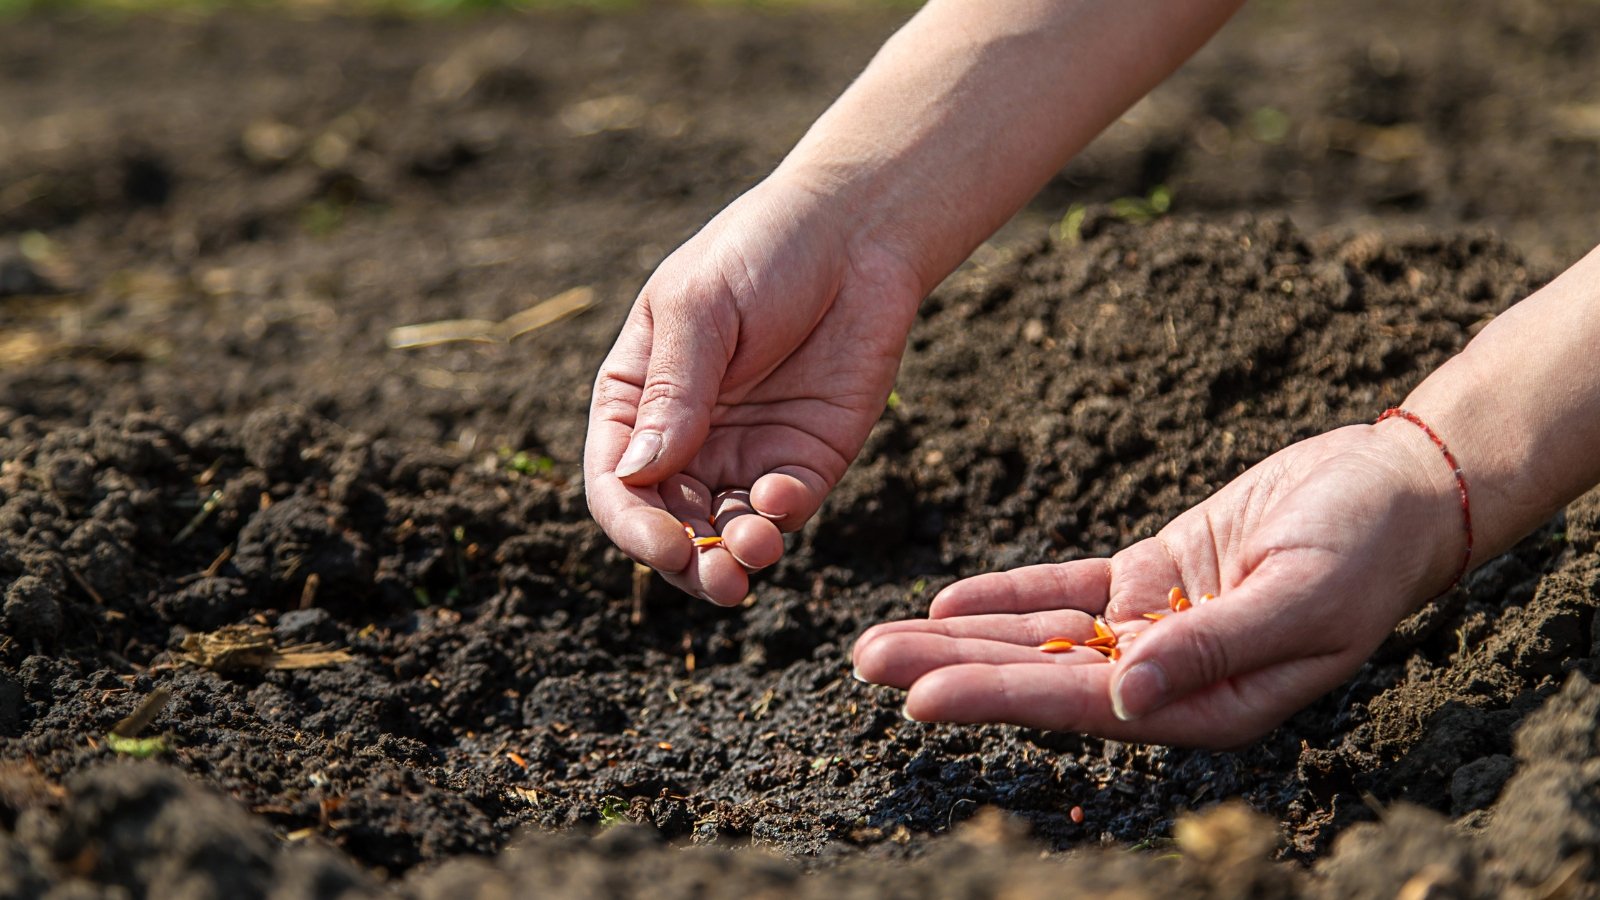 Close-up of a woman's hands sowing cucumber seeds, which are tiny teardrop-shaped, flat and orange in color, into moist soil in a sunny garden.